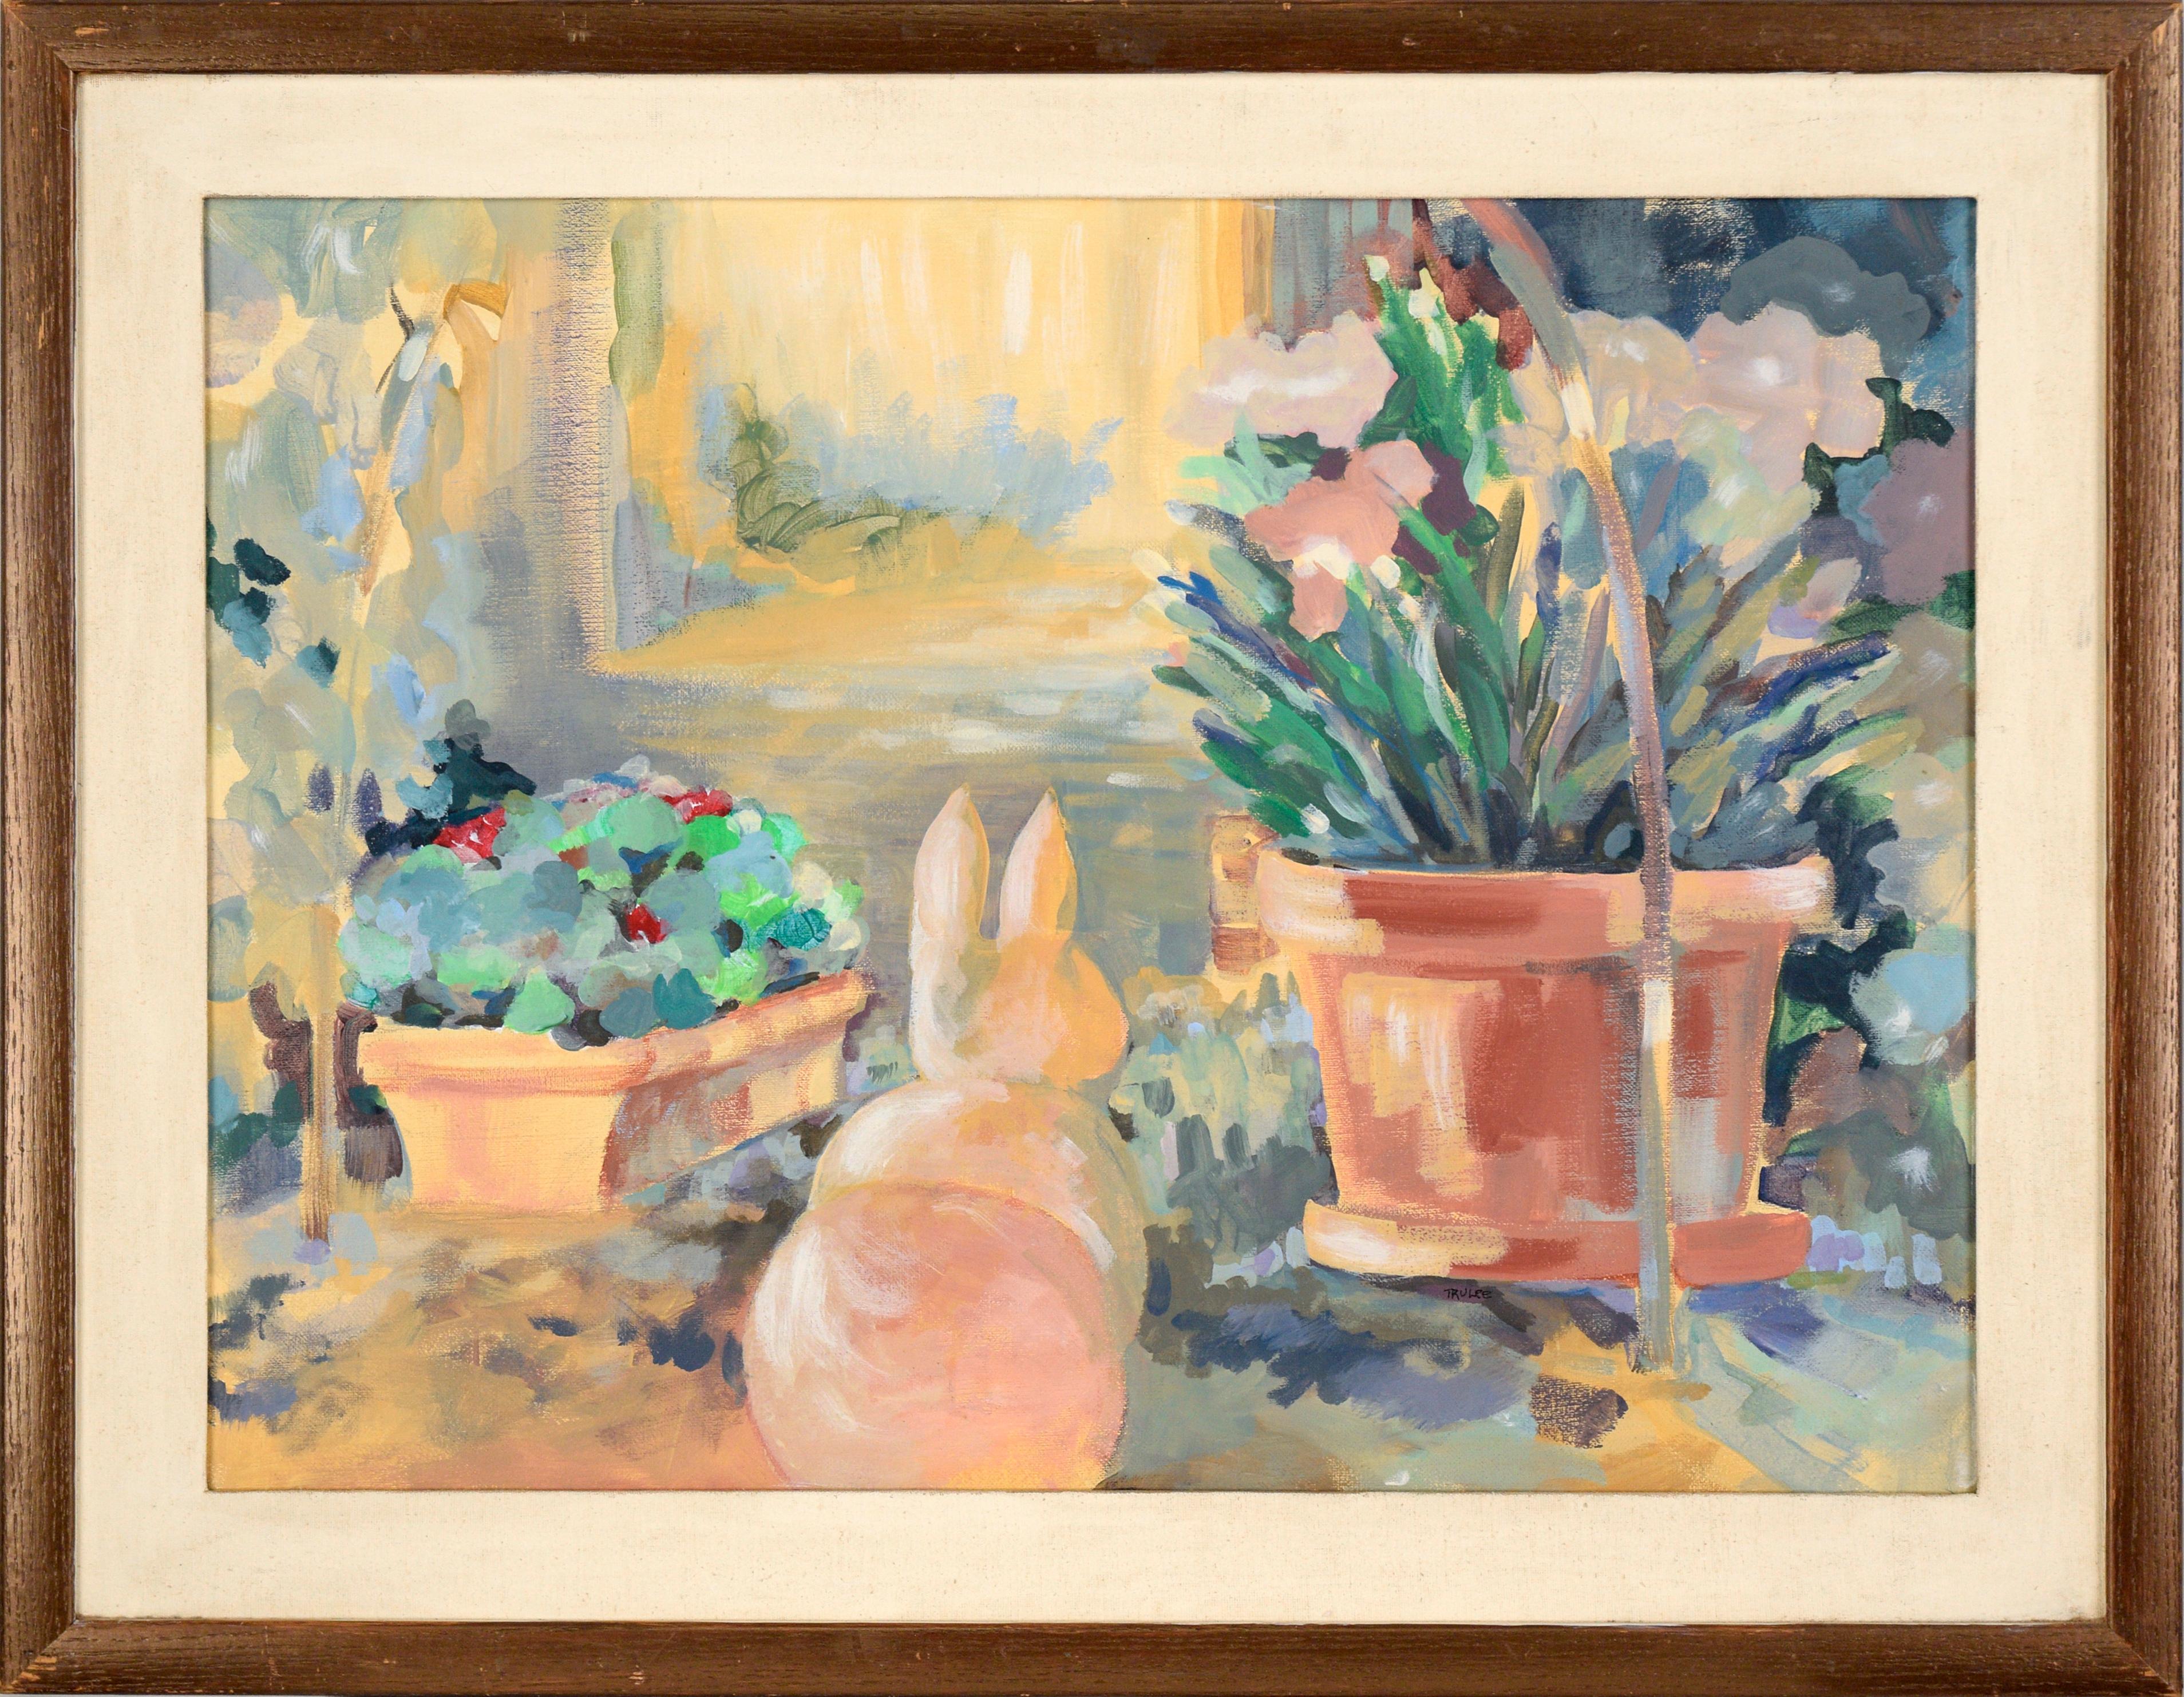 Truelee Landscape Painting - Rabbit Sculpture in the Garden - Acrylic on Canvas